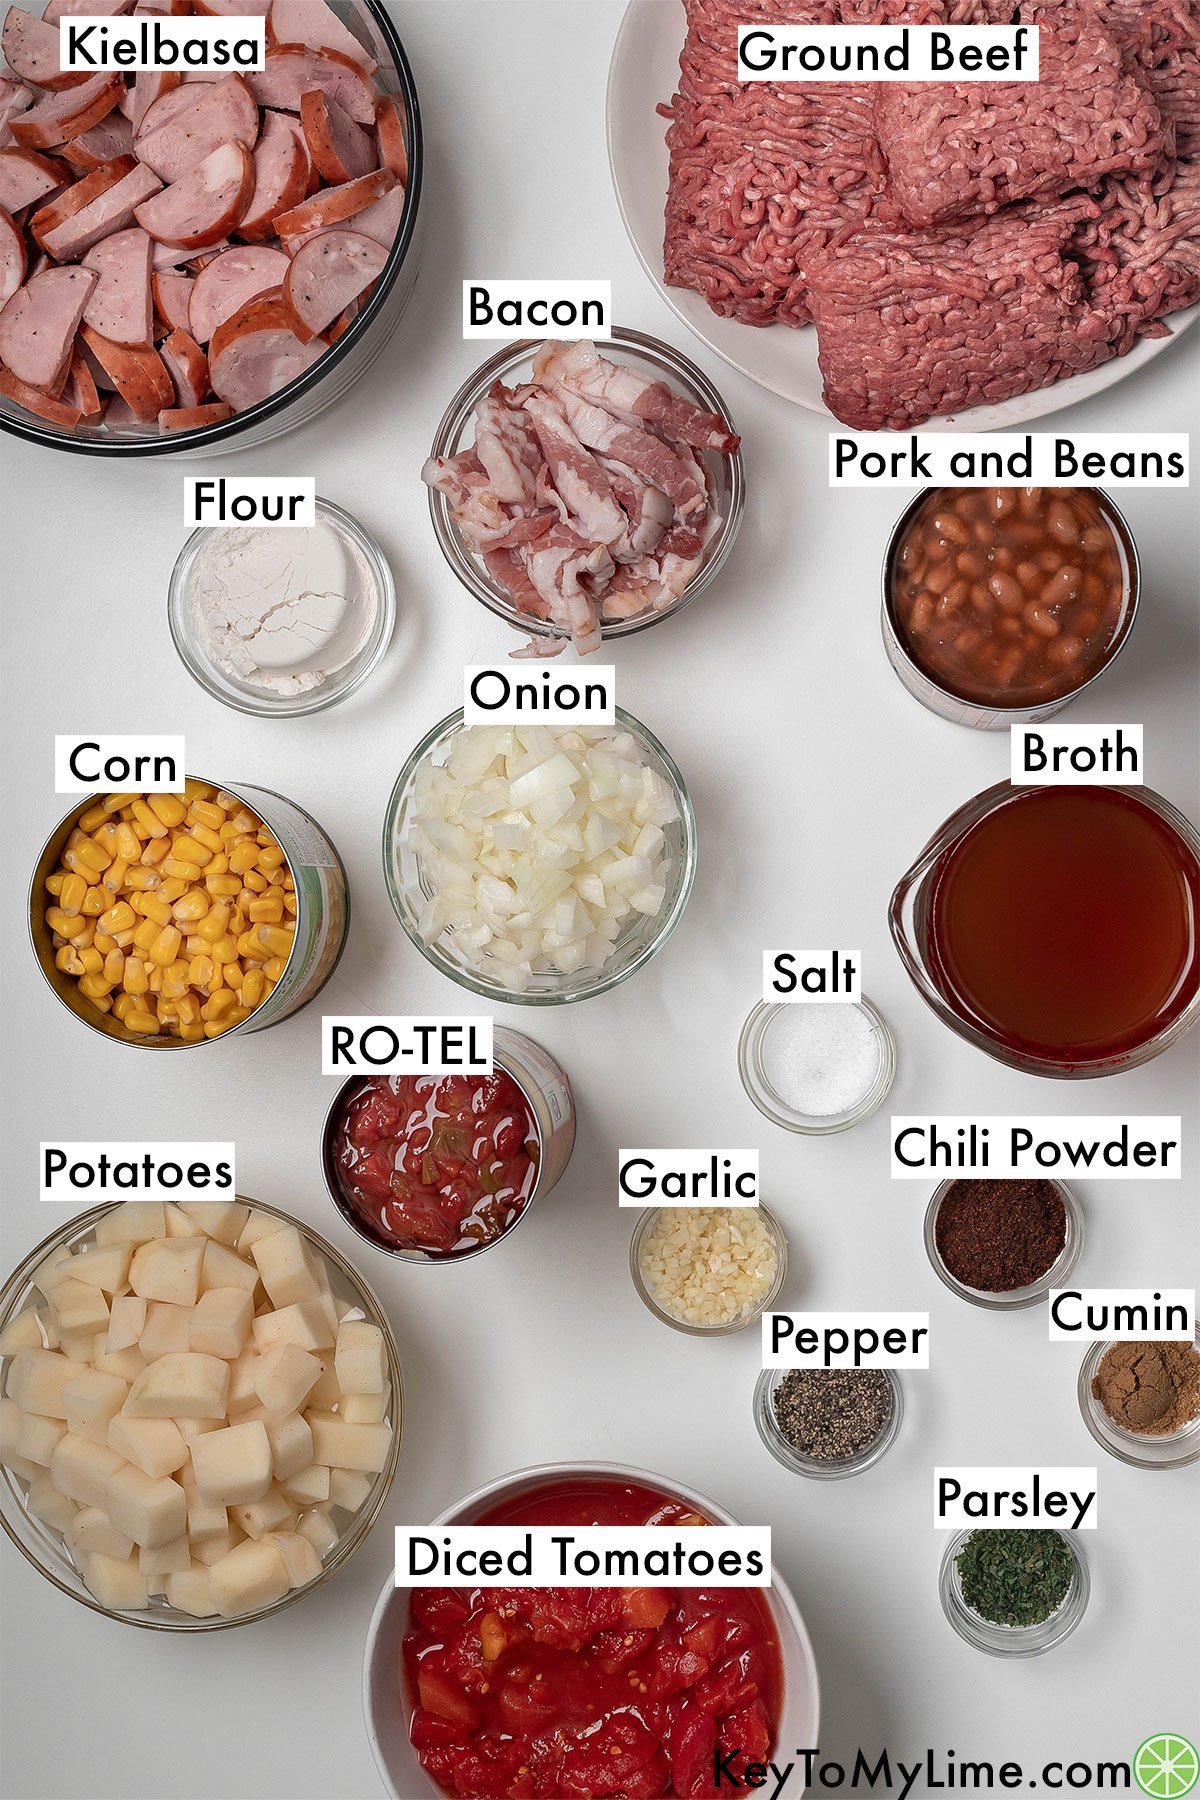 The labeled ingredients for cowboy stew.